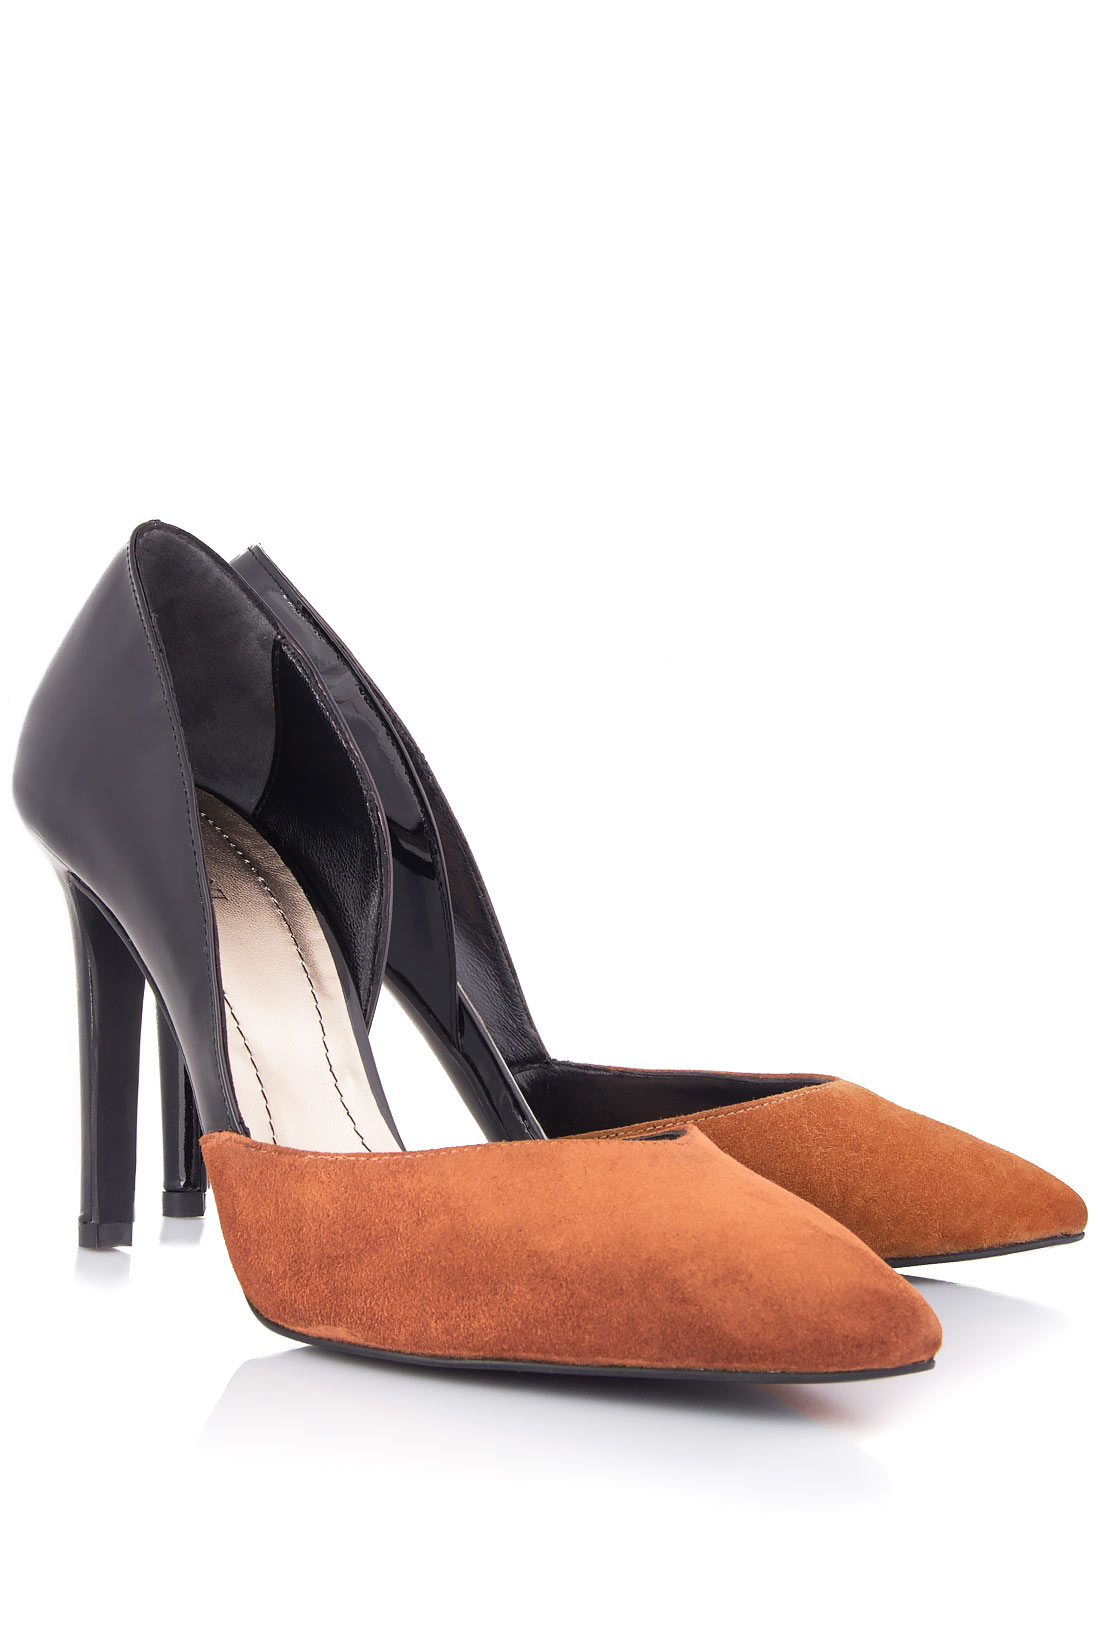 D'Orsay two-tone leather pumps Ana Kaloni image 1